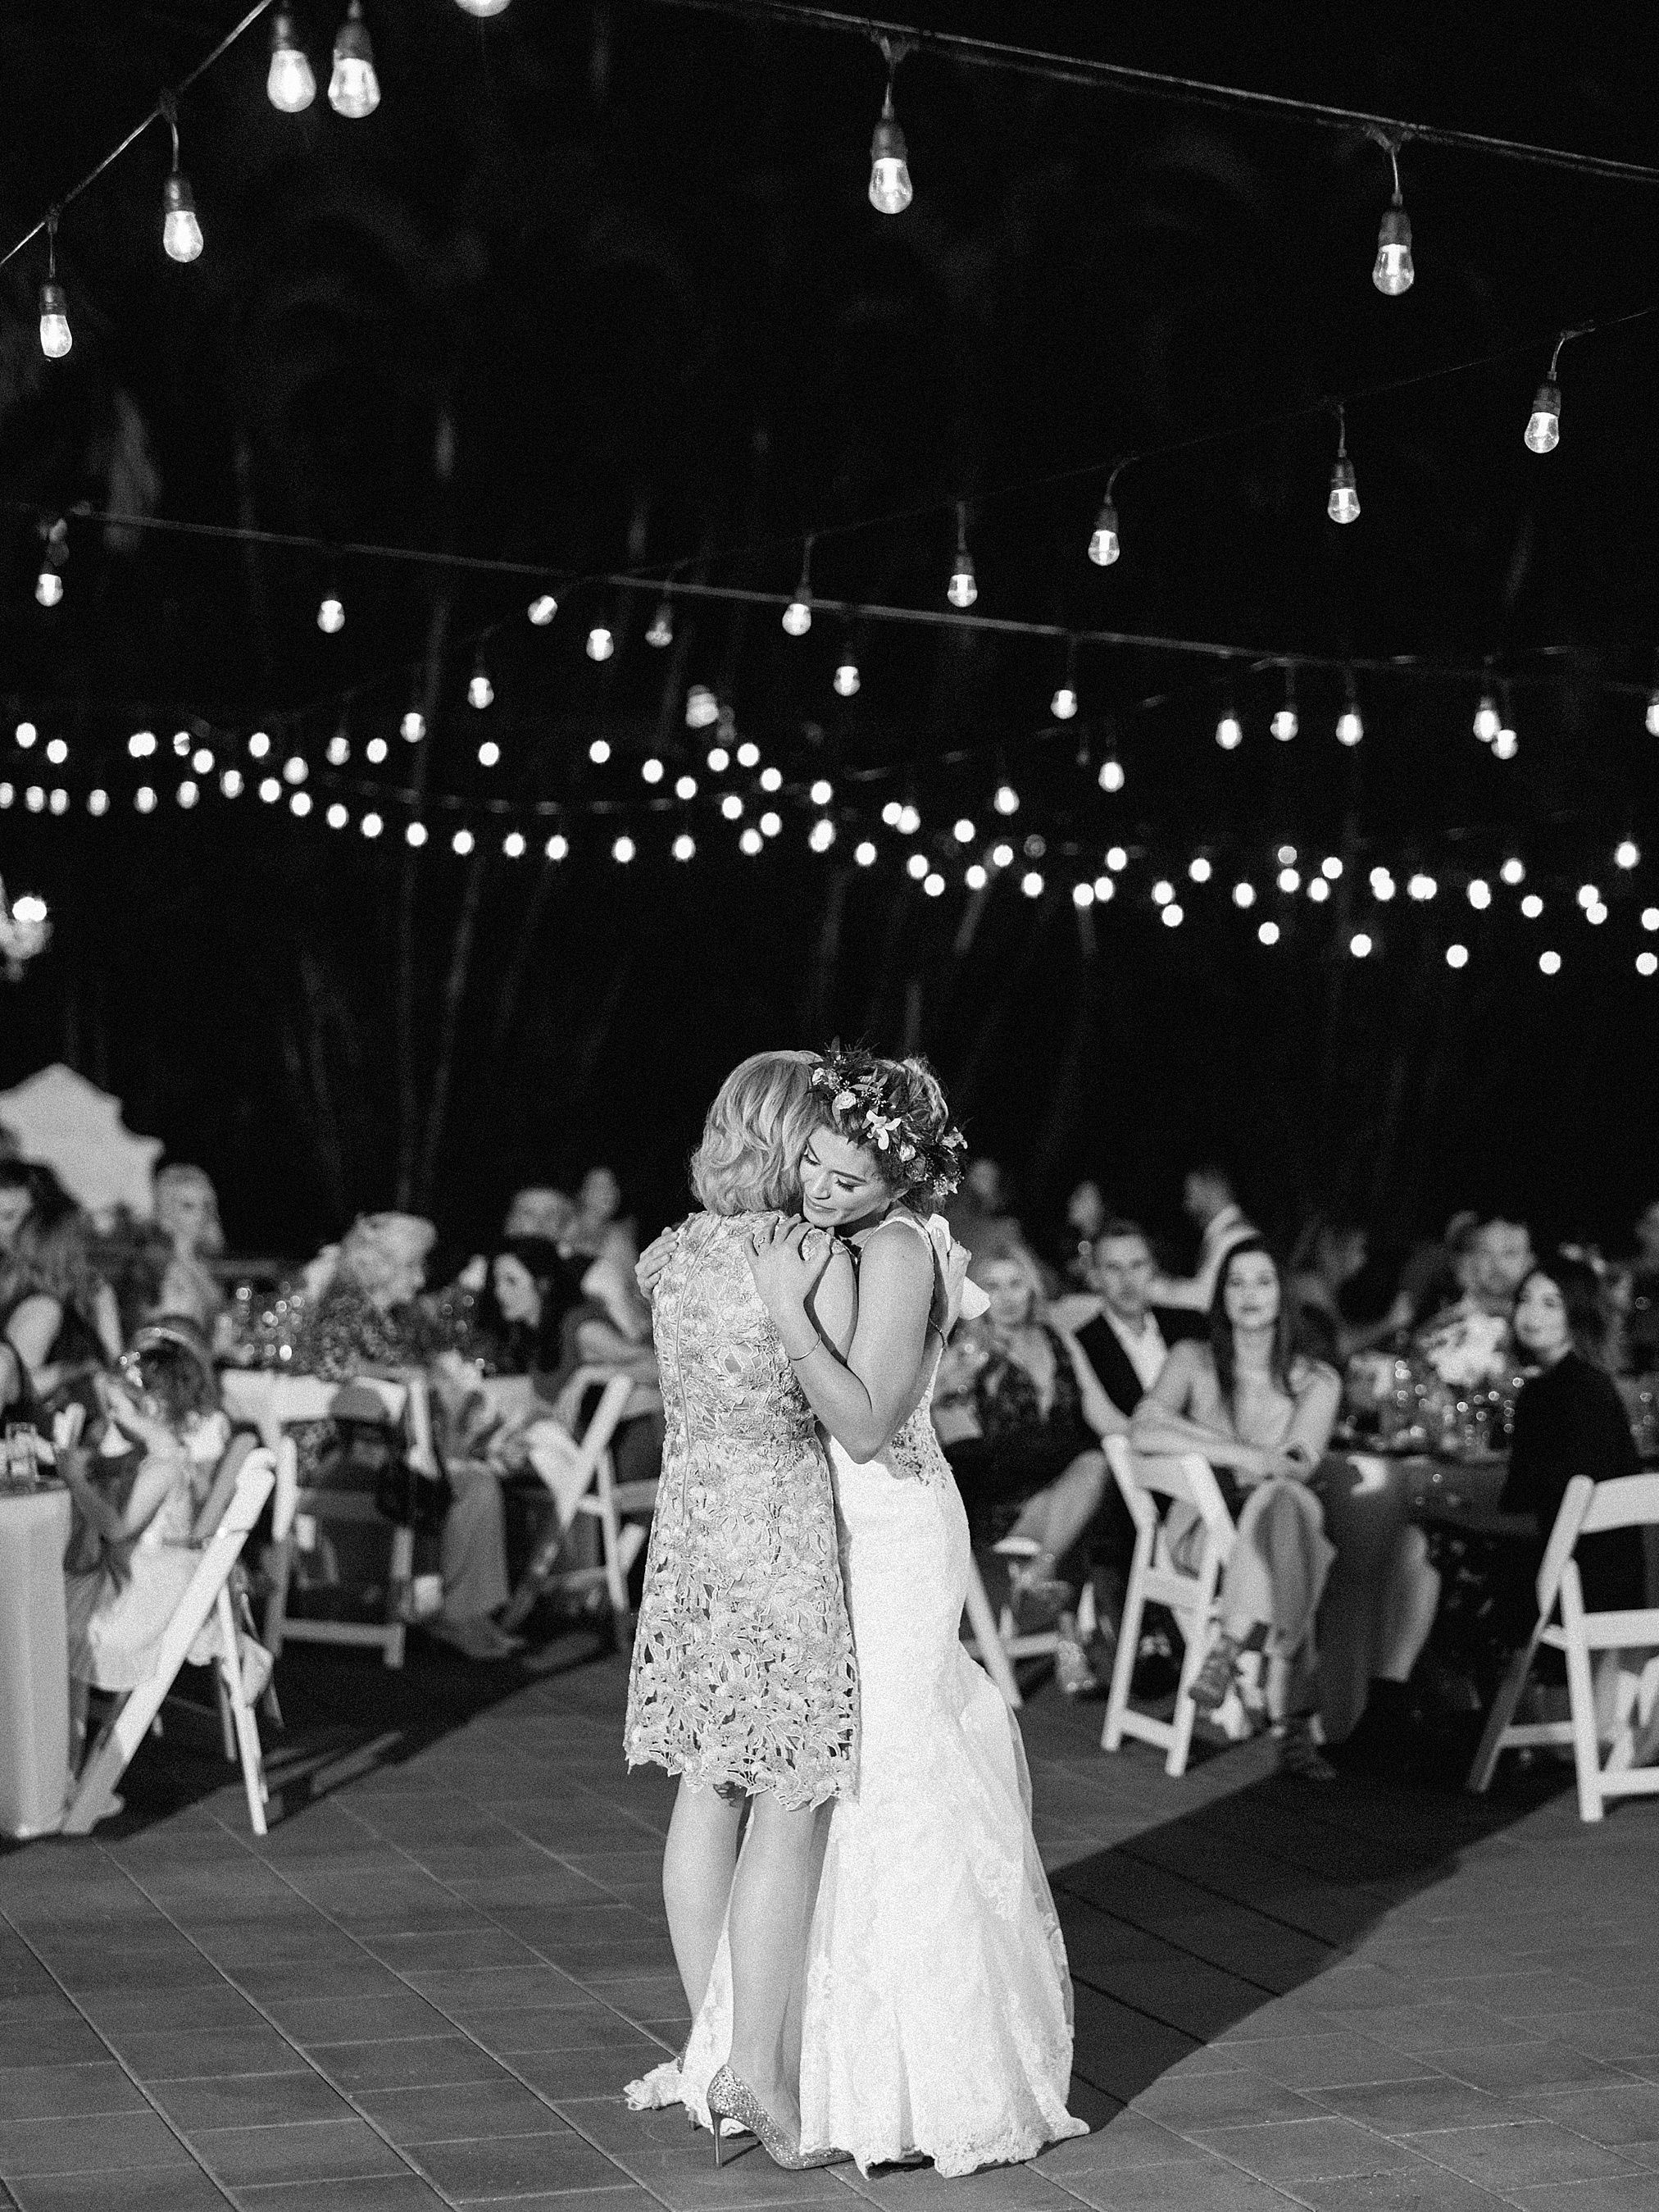 Mother Daughter Dance -   17 wedding Reception pictures ideas